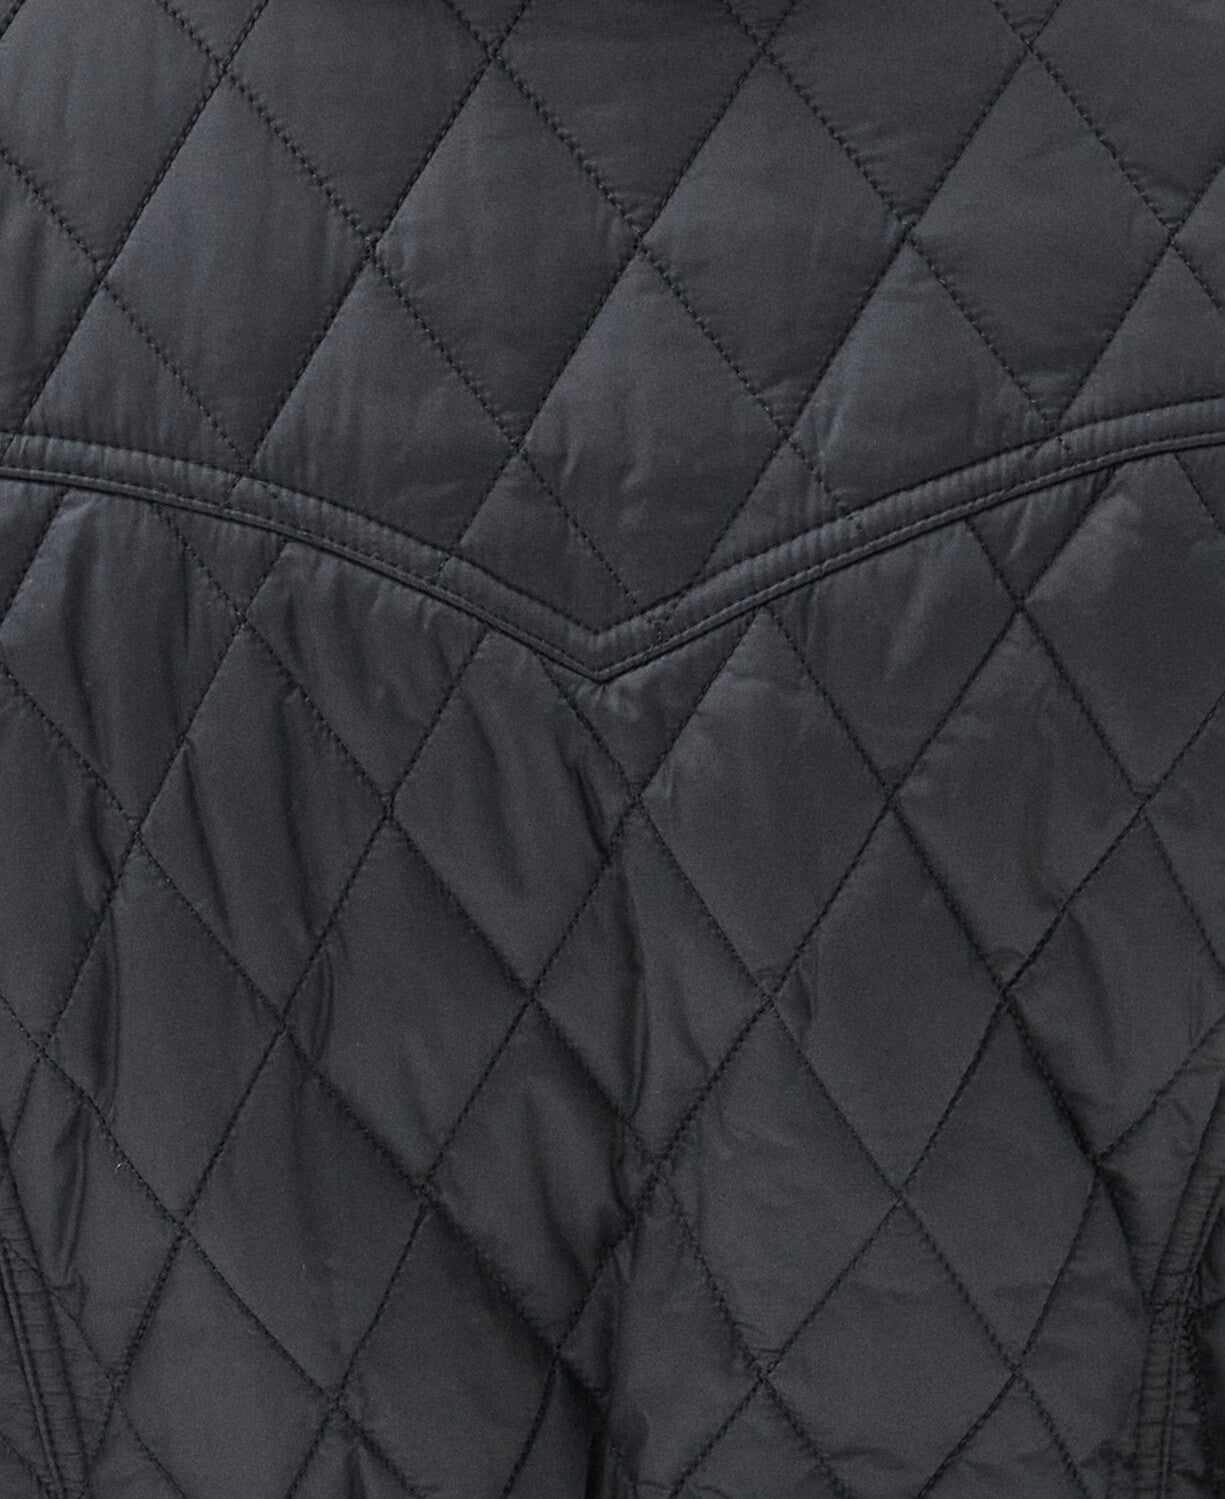 Barbour Country Utility Quilted Jacket